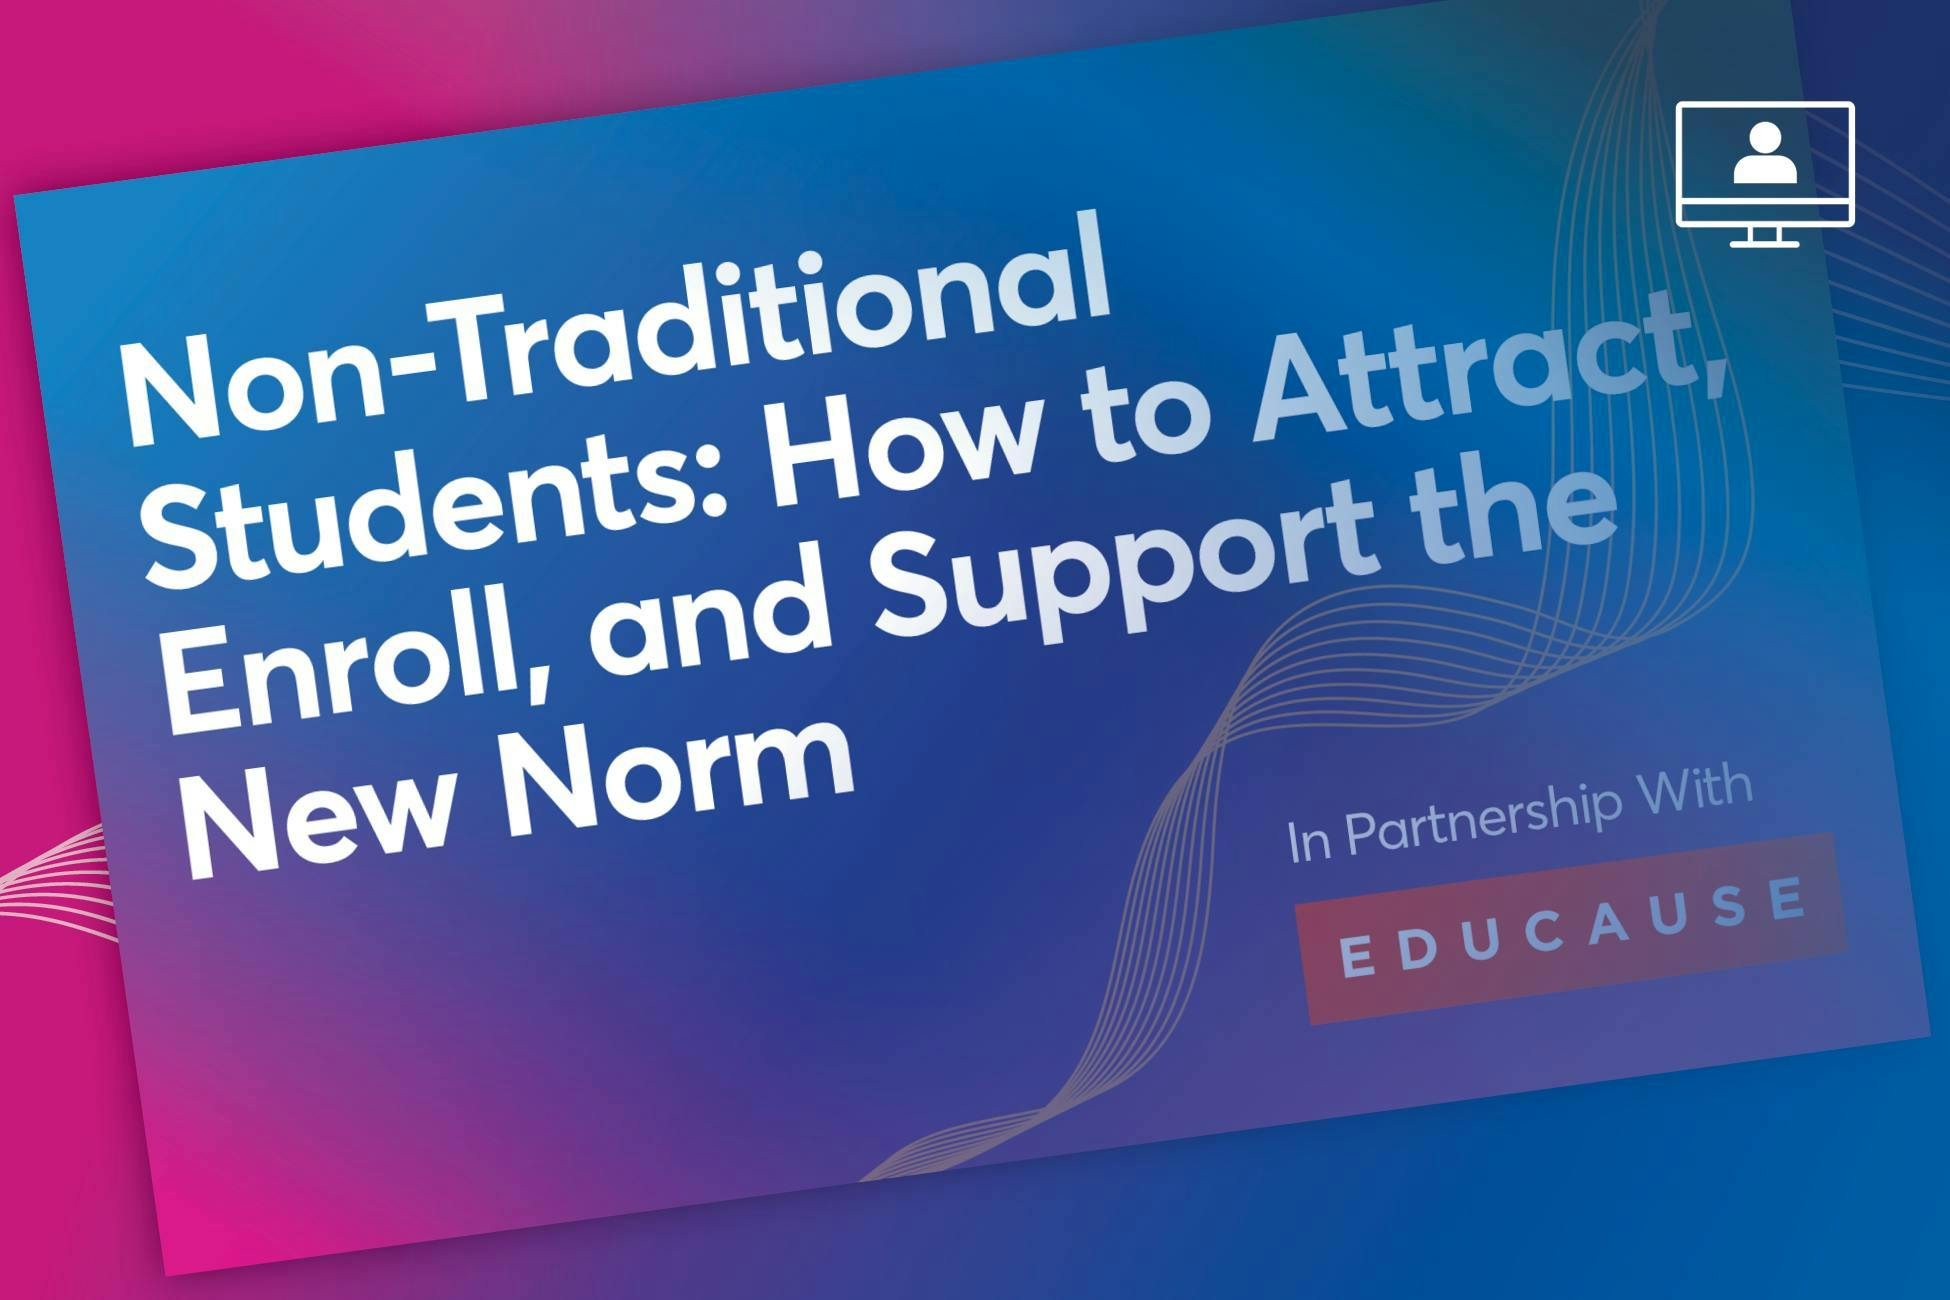 Webinar: Non-Traditional Students: How to Attract, Enroll, and Support the New Norm